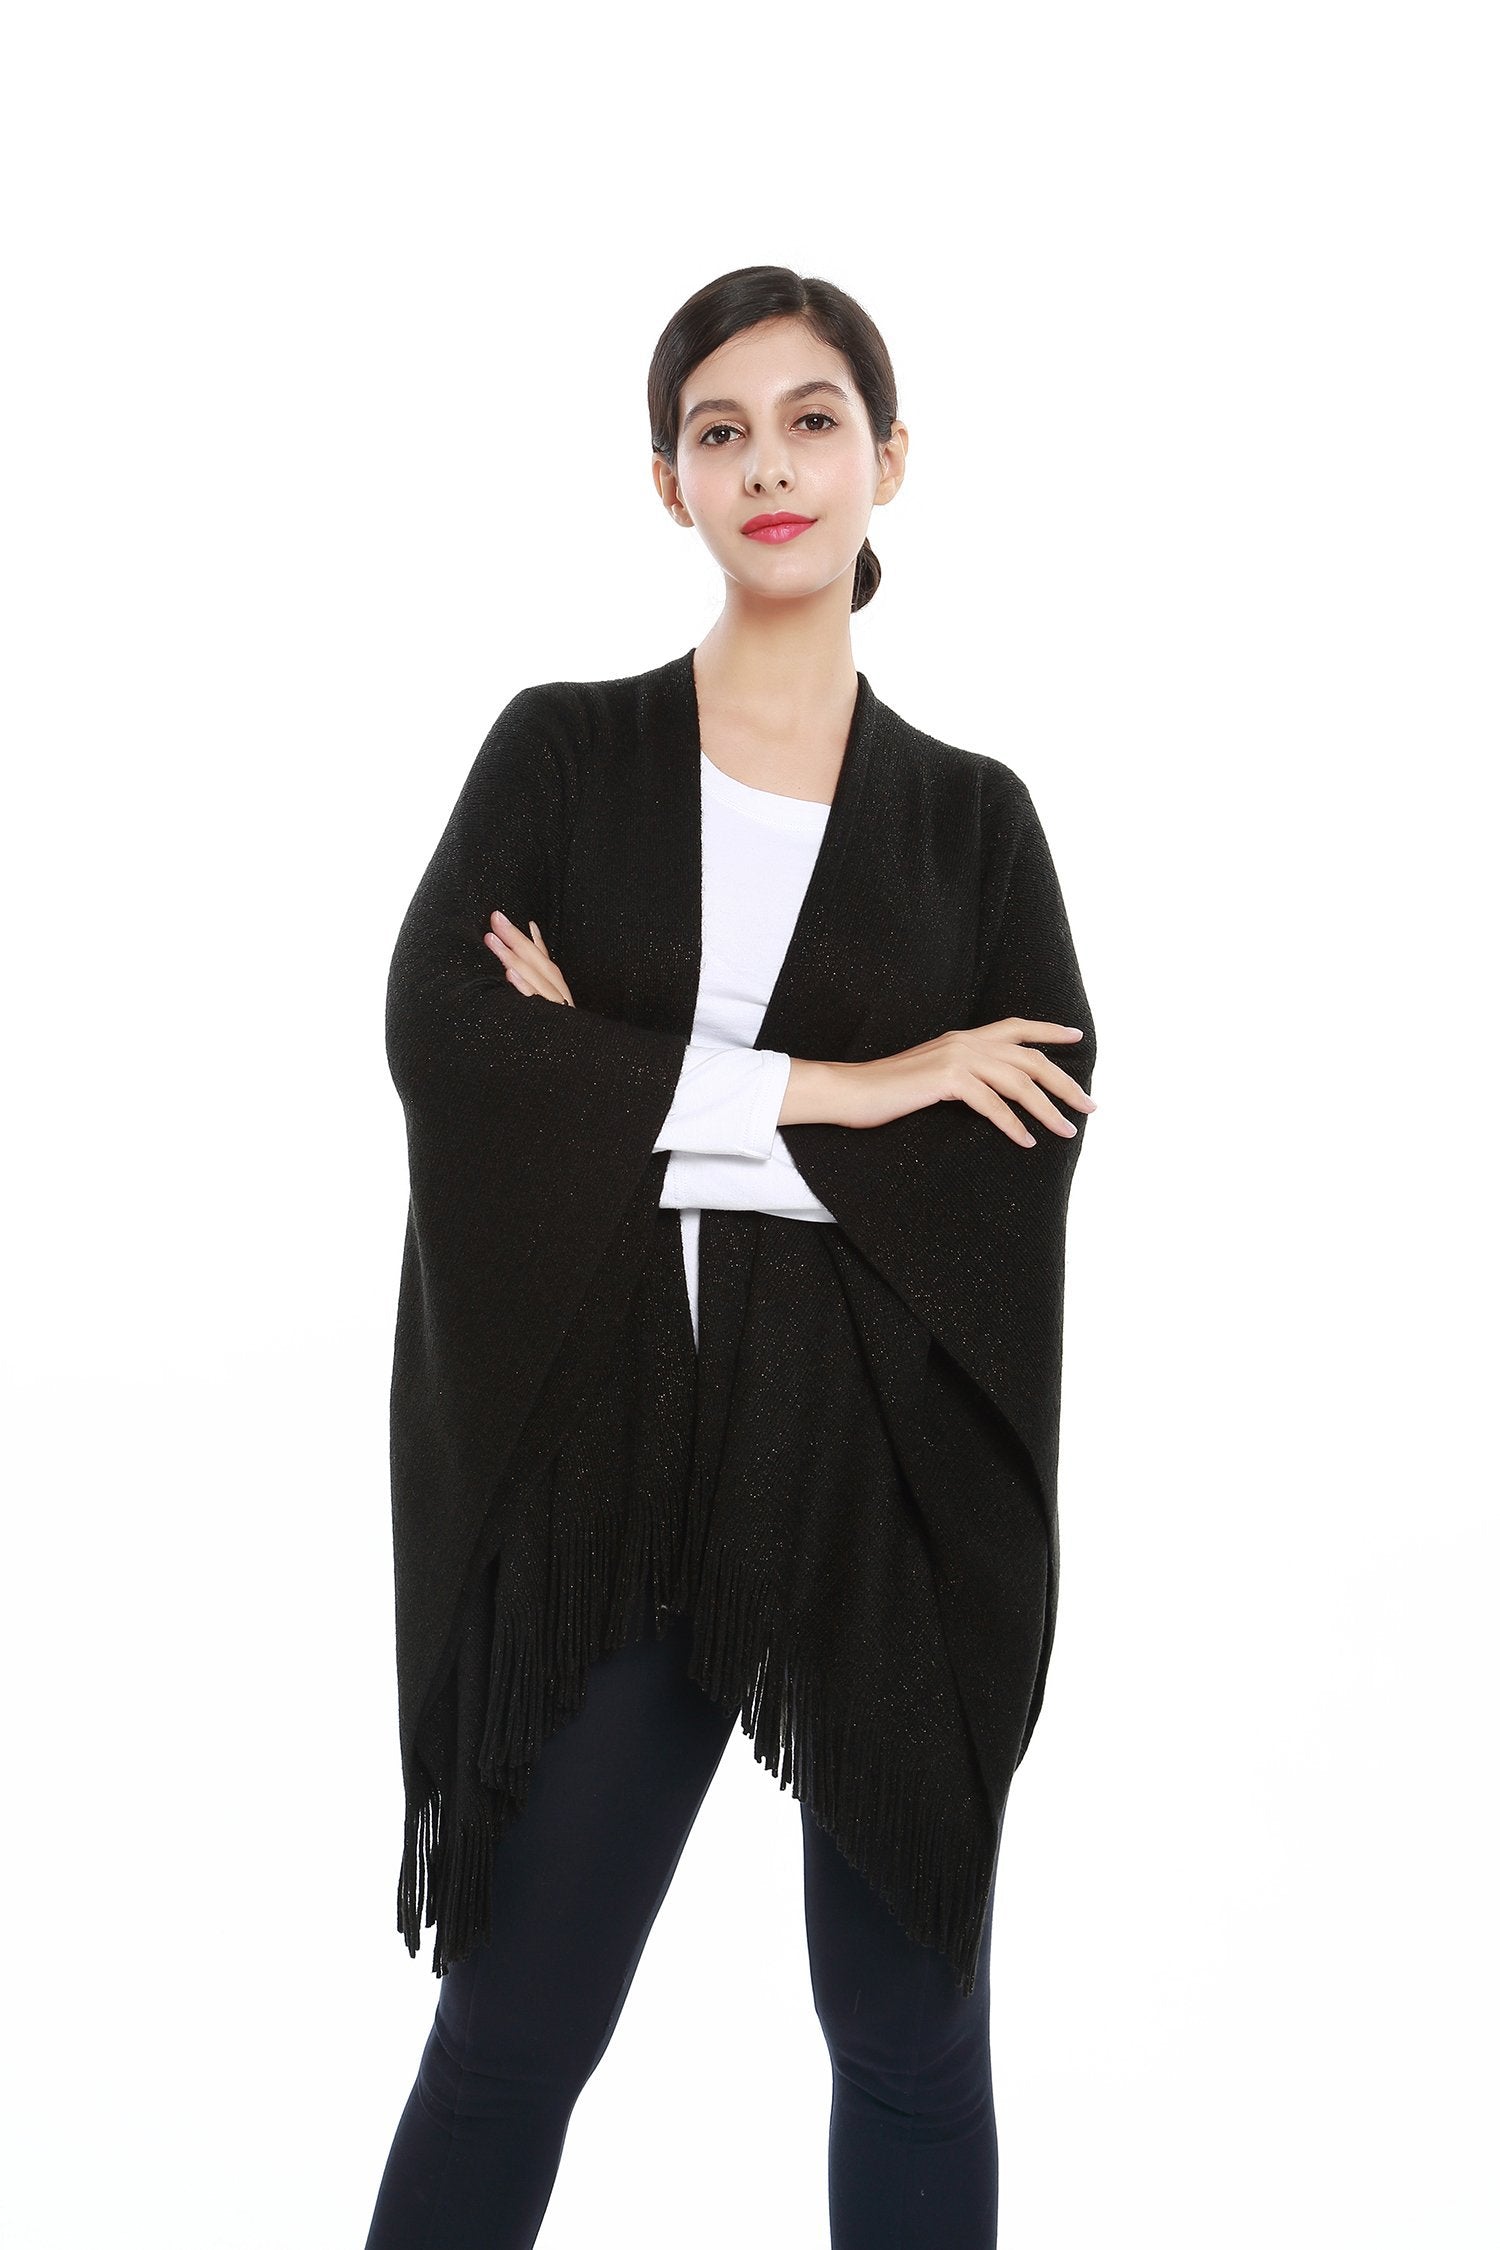 Women's Knitted Kimono Cardigan Cape Solid Black with Golden Threads ...